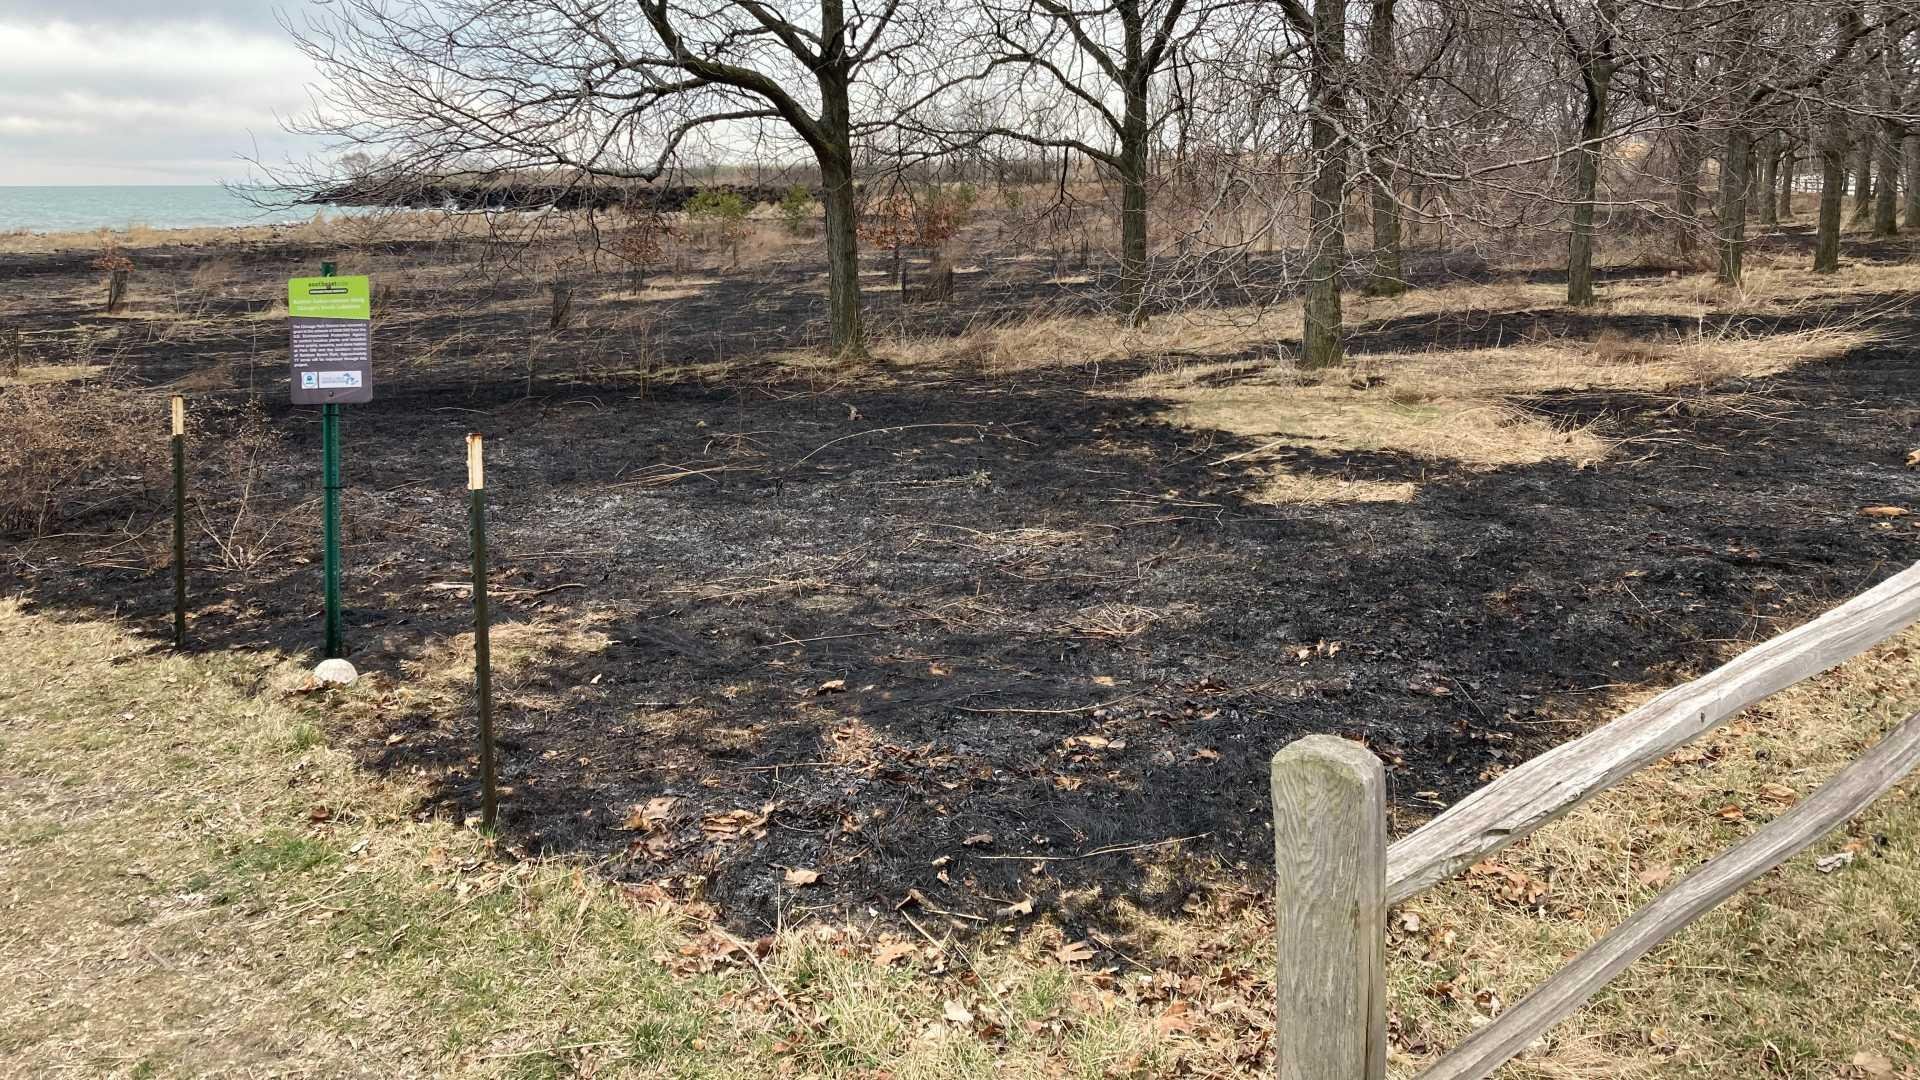 The scorched earth after a burn may look damaged but it’s a sign of improved health. Pictured: Rainbow Beach. (Courtesy Chicago Park District)